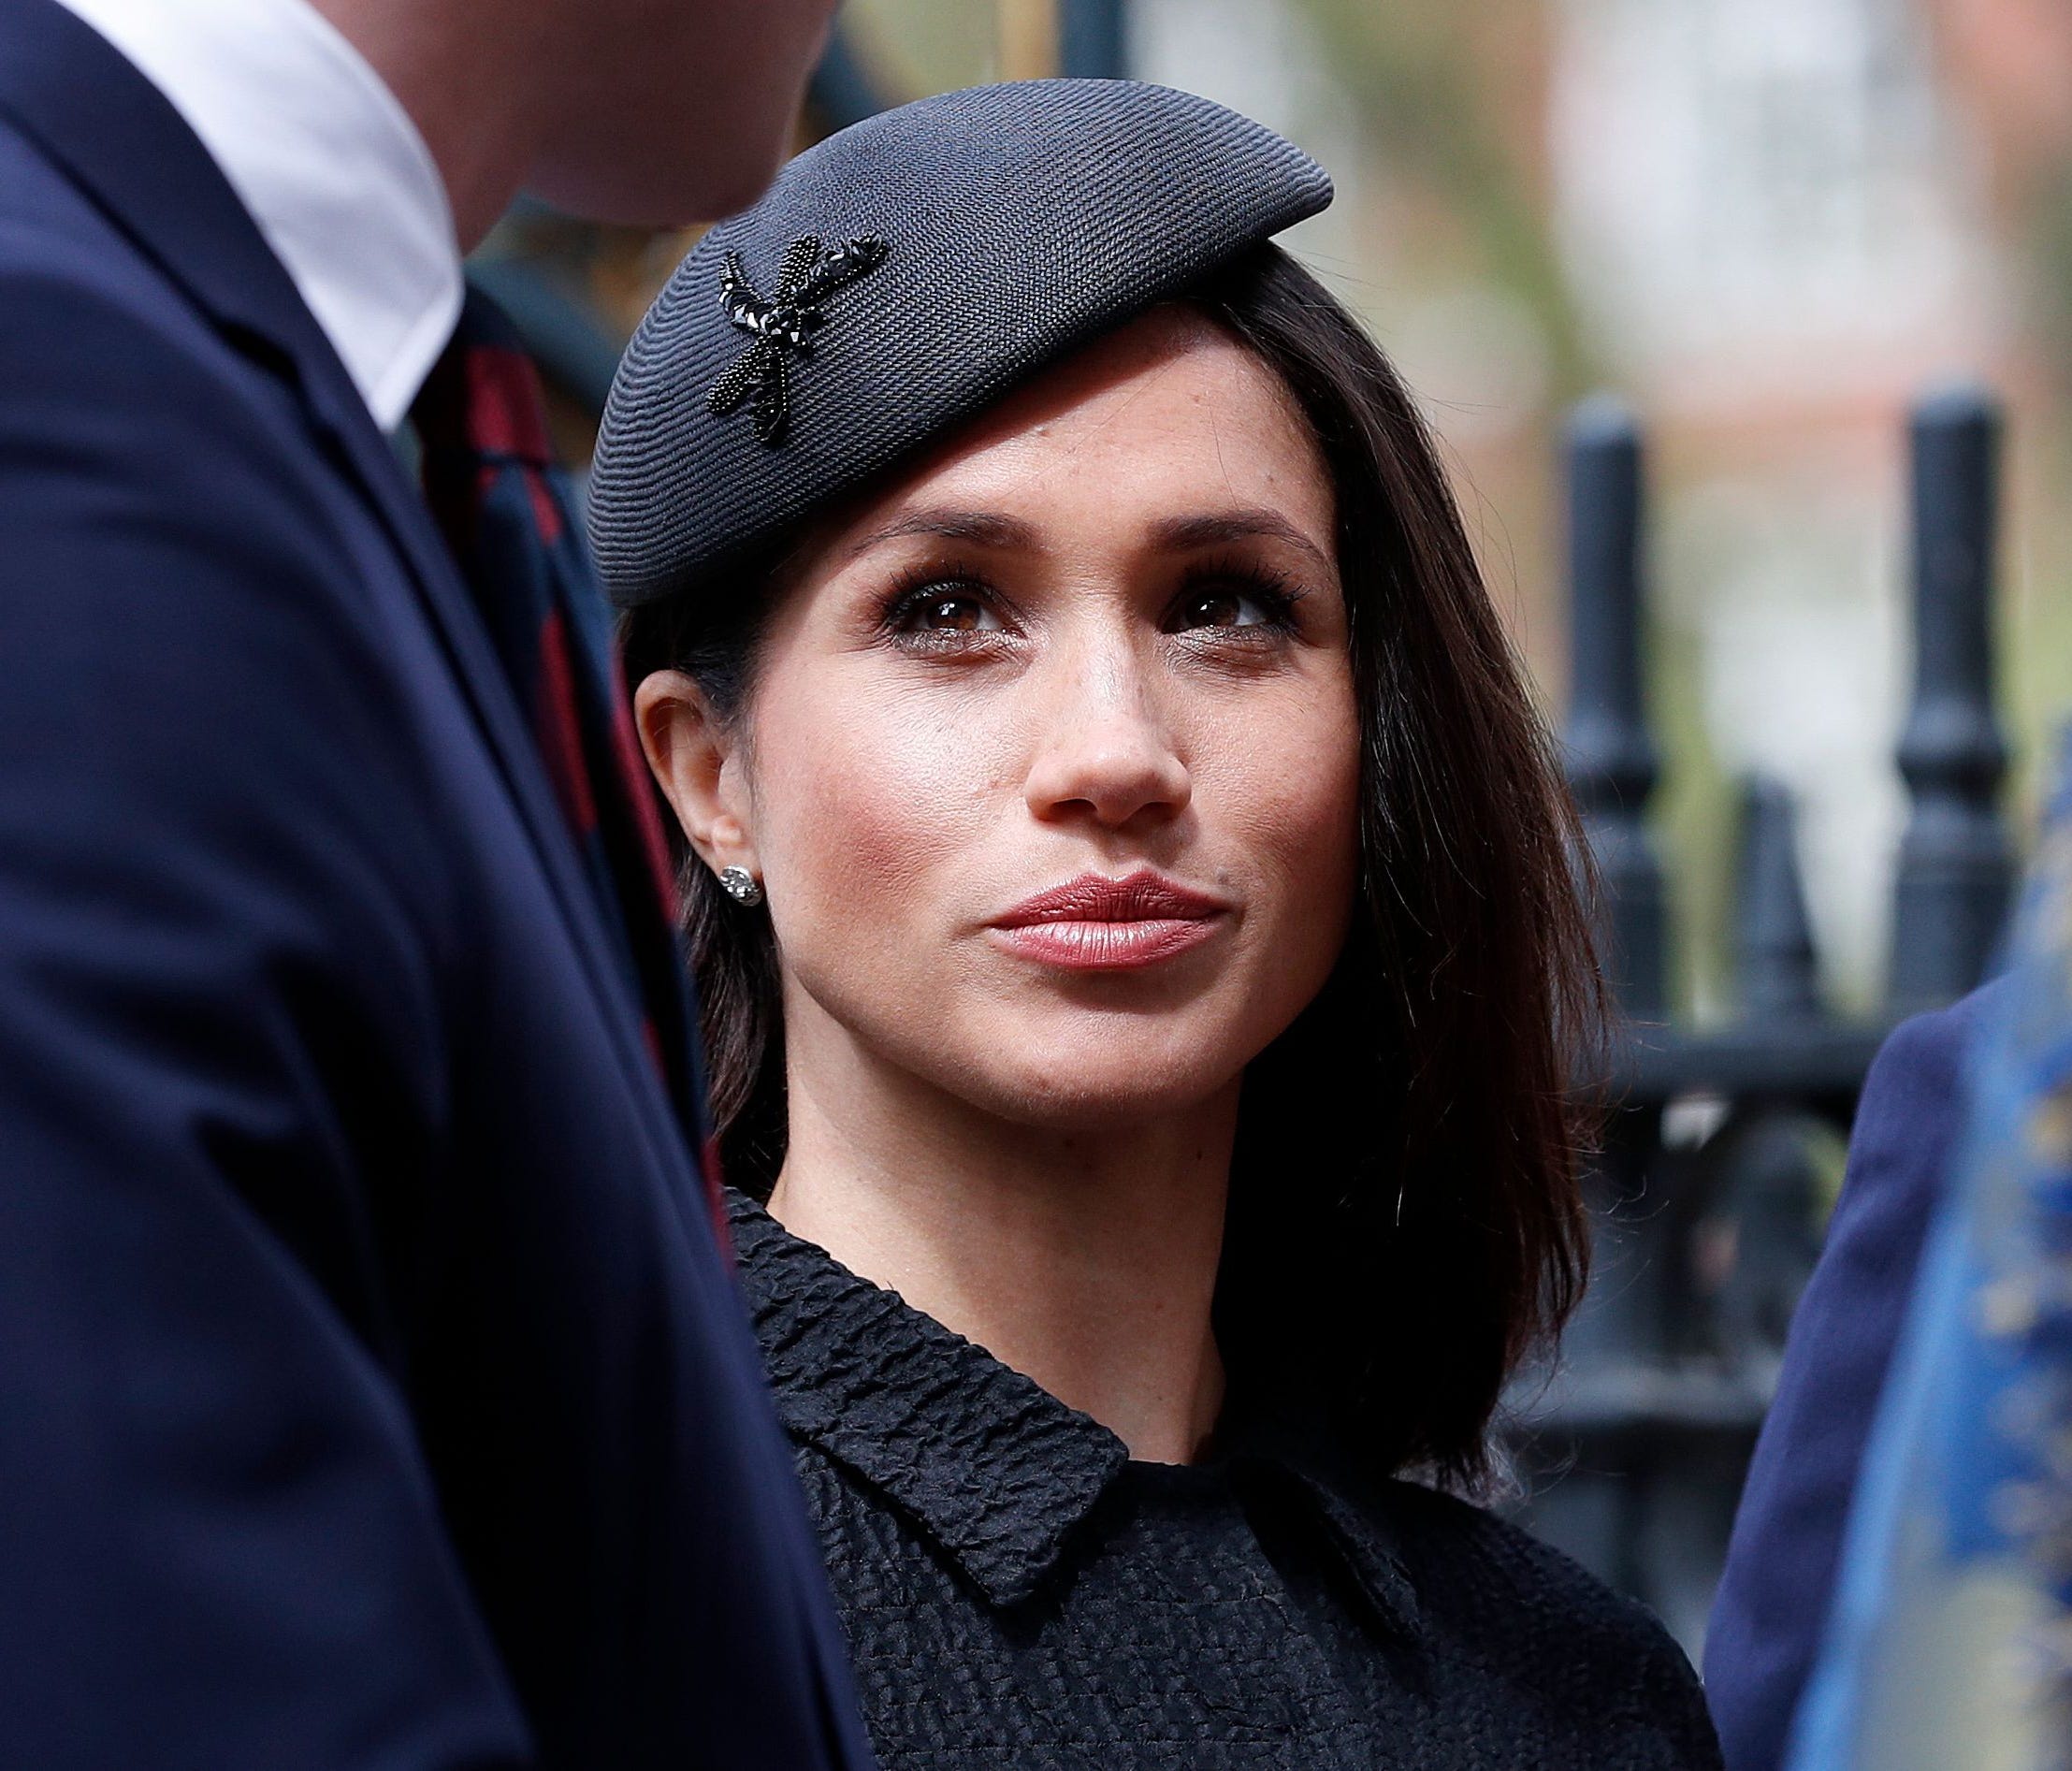 Meghan Markle is pictured in a file photo taken on April 25, 2018.